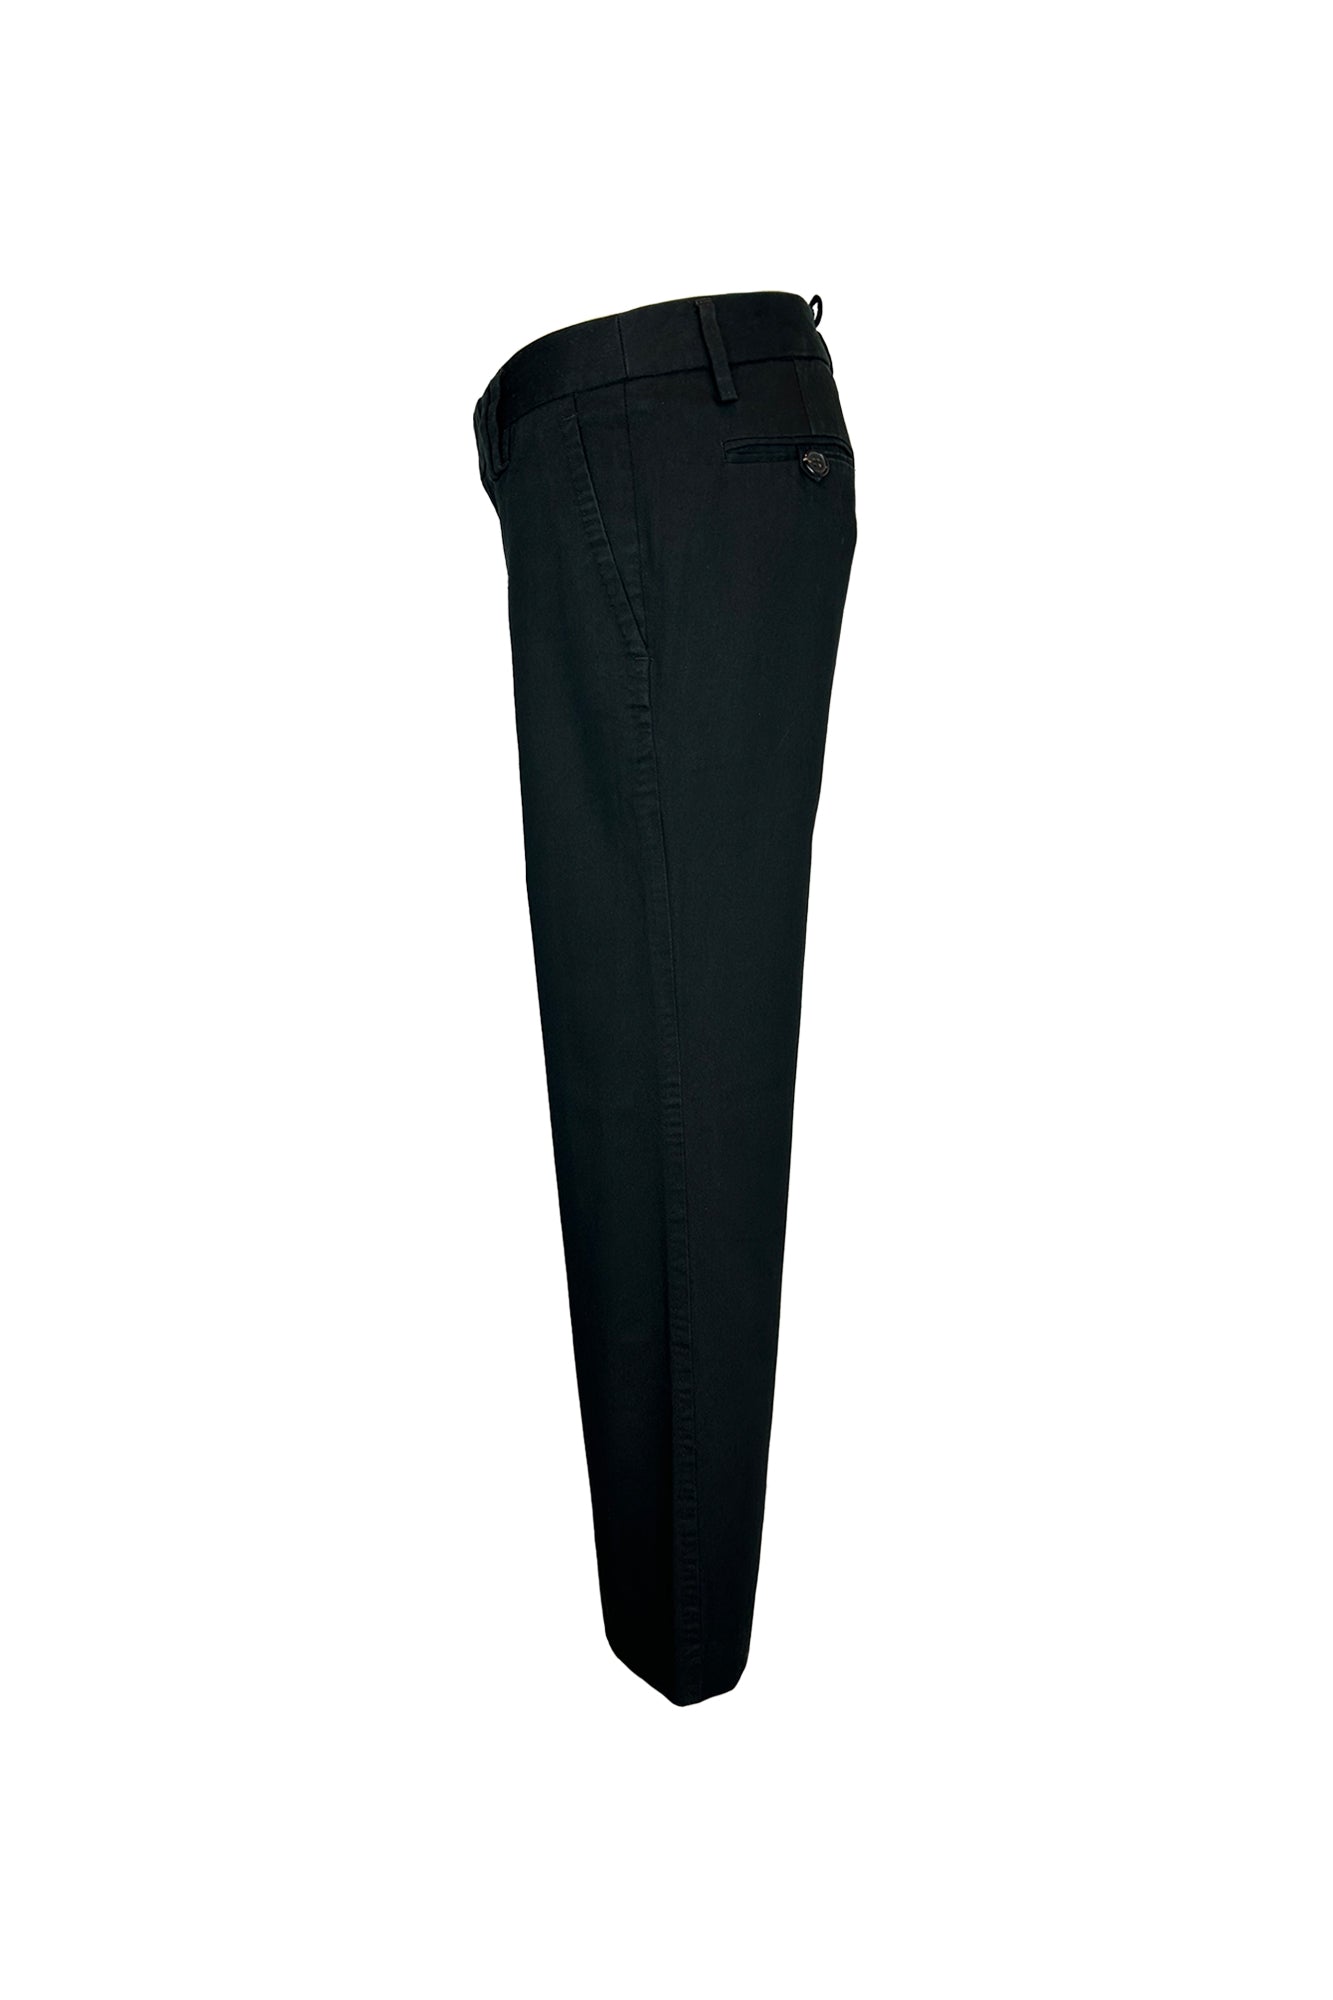 DSQUARED2 F/W 2009 TROUSERS